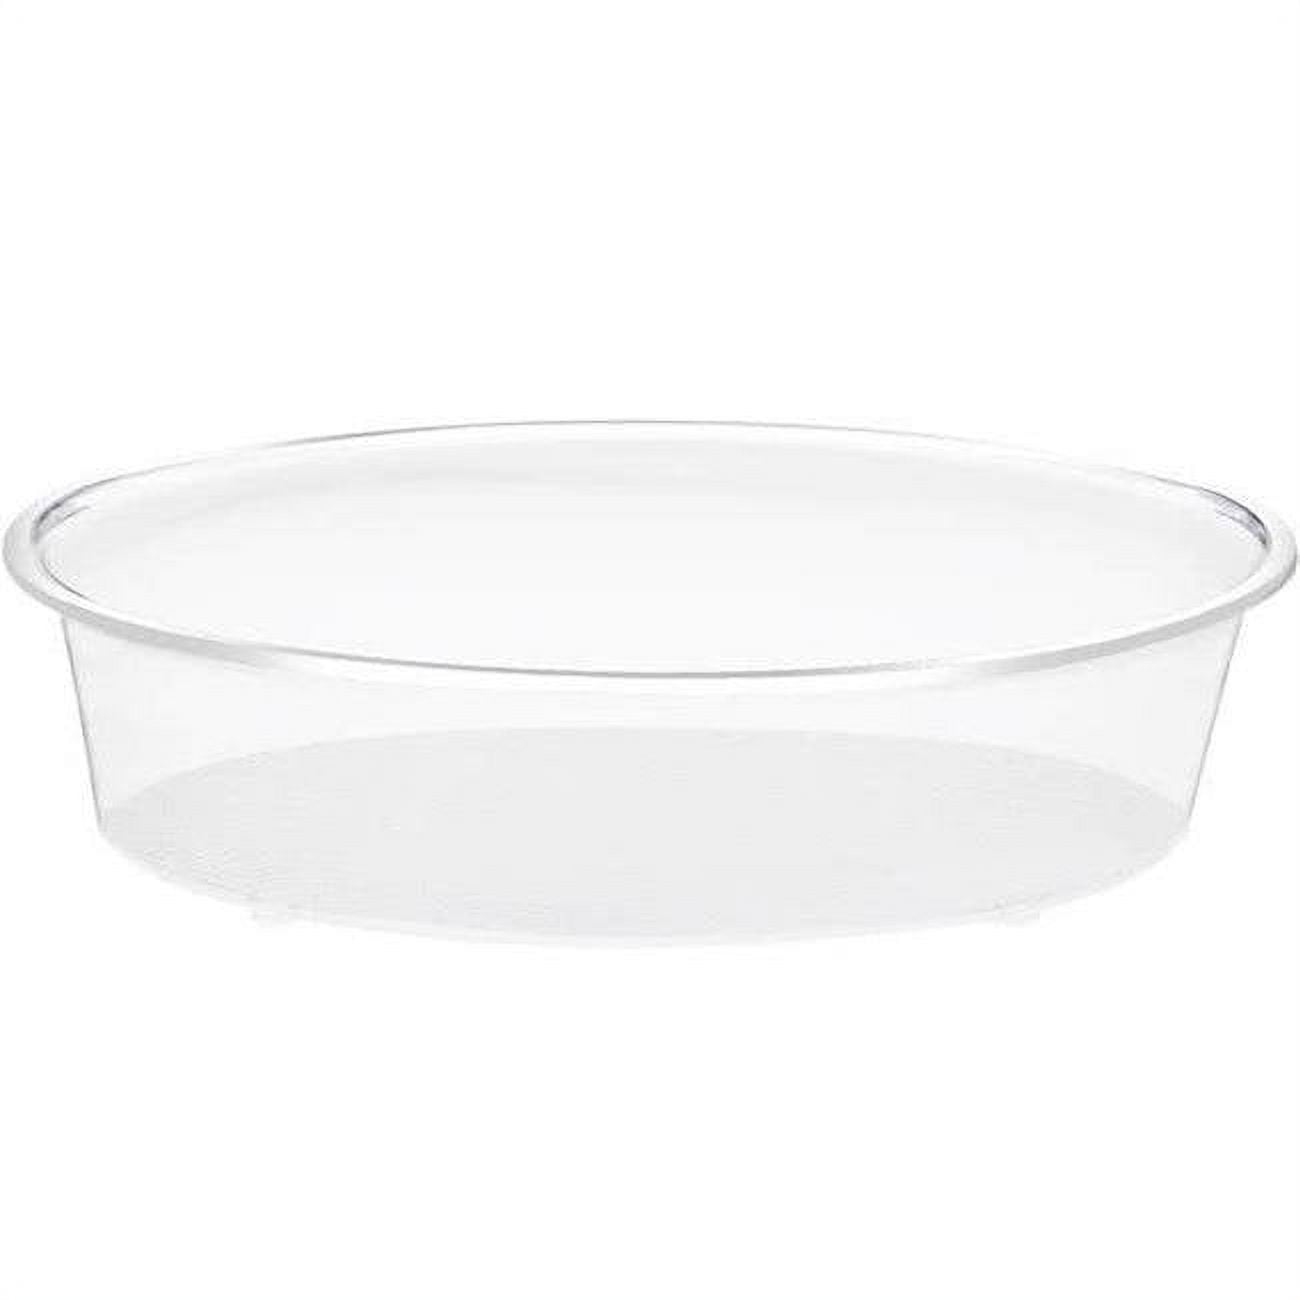 Picture of Cal Mil 316-12-12 12 in. Round Deep Tray - Clear